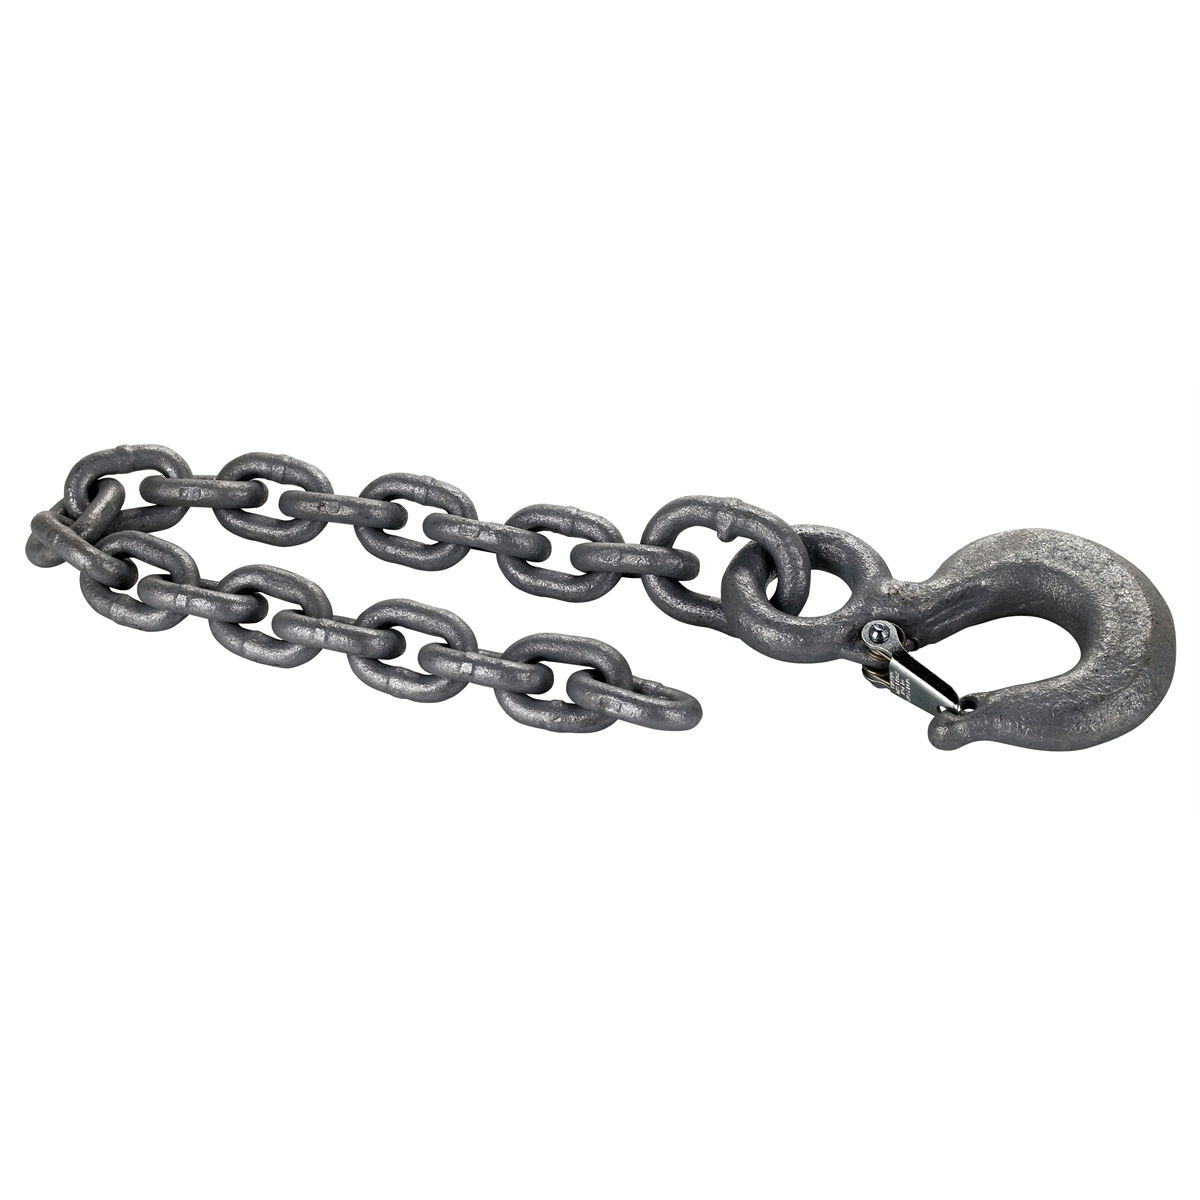 3/8" Alloy Chain for Overhead Lifts and Hoists - 6,000 Lb Capaci